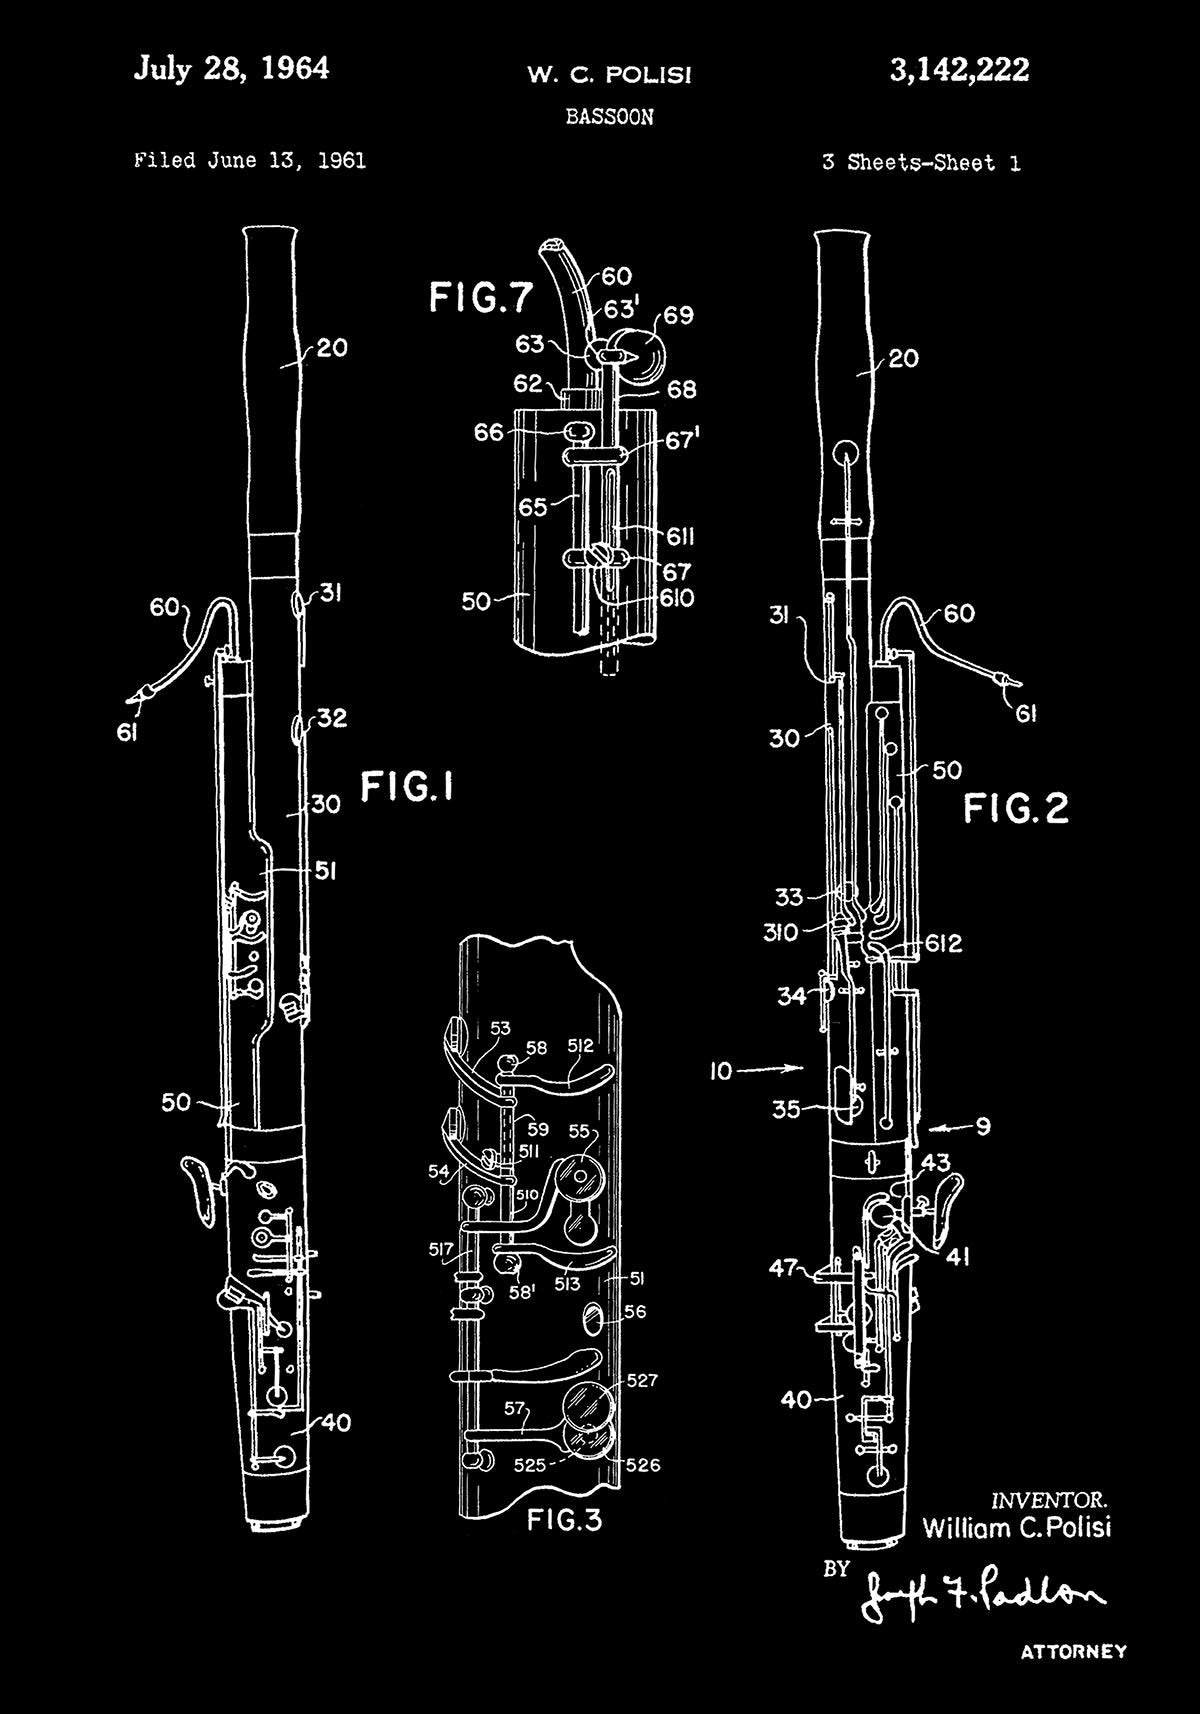 Bassoon Patent Poster